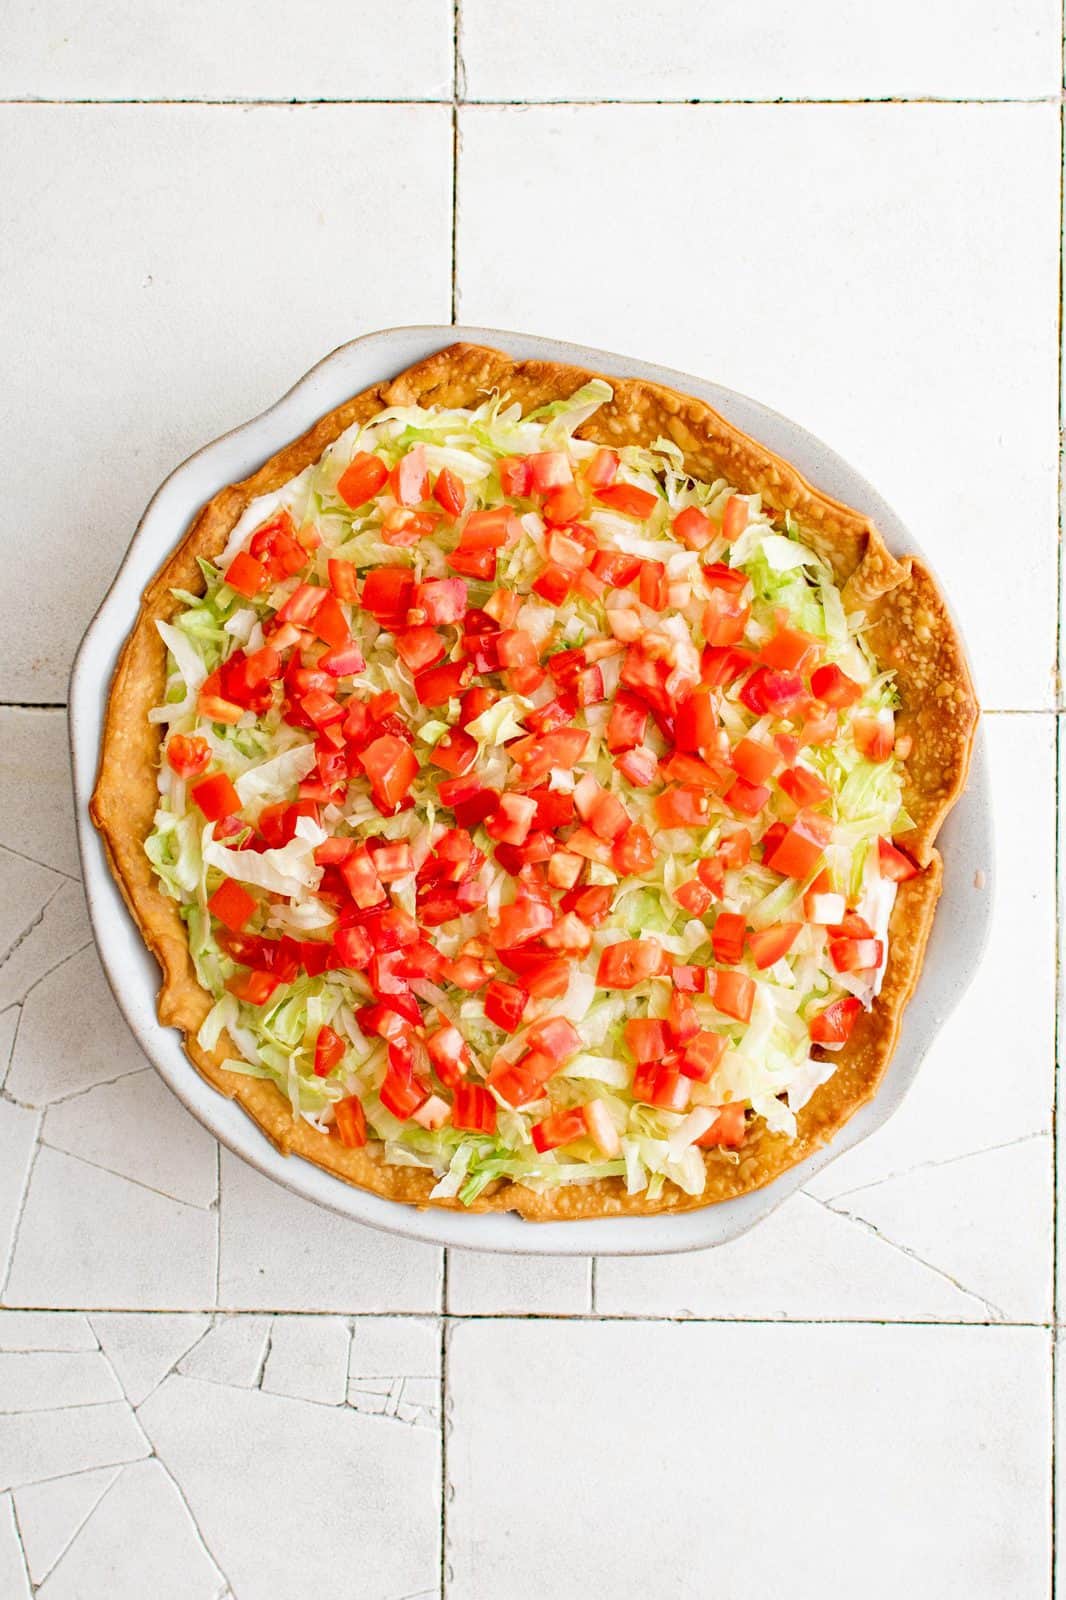 Sour cream, lettuce, tomatoes and olives added to top of baked pie.